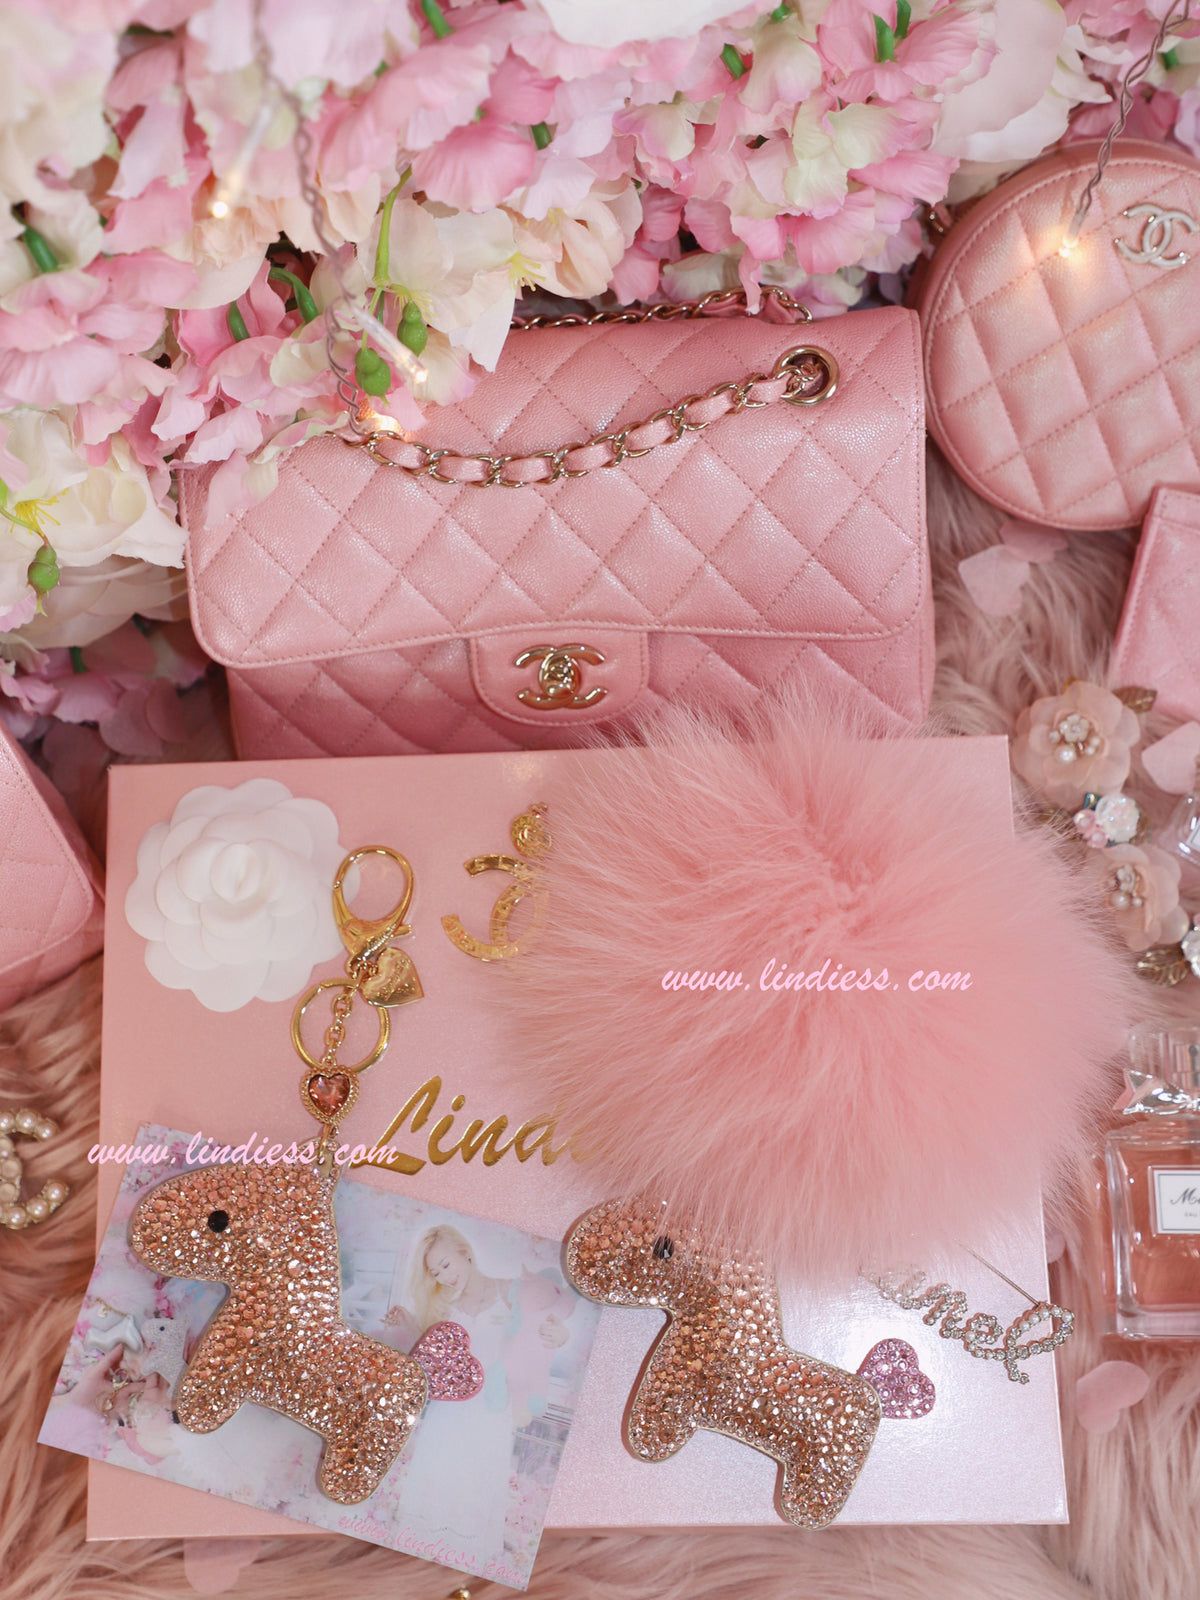 A pink Chanel bag, a pink fluffy keychain, and a pink card holder are laid out on a fur blanket. - Bling